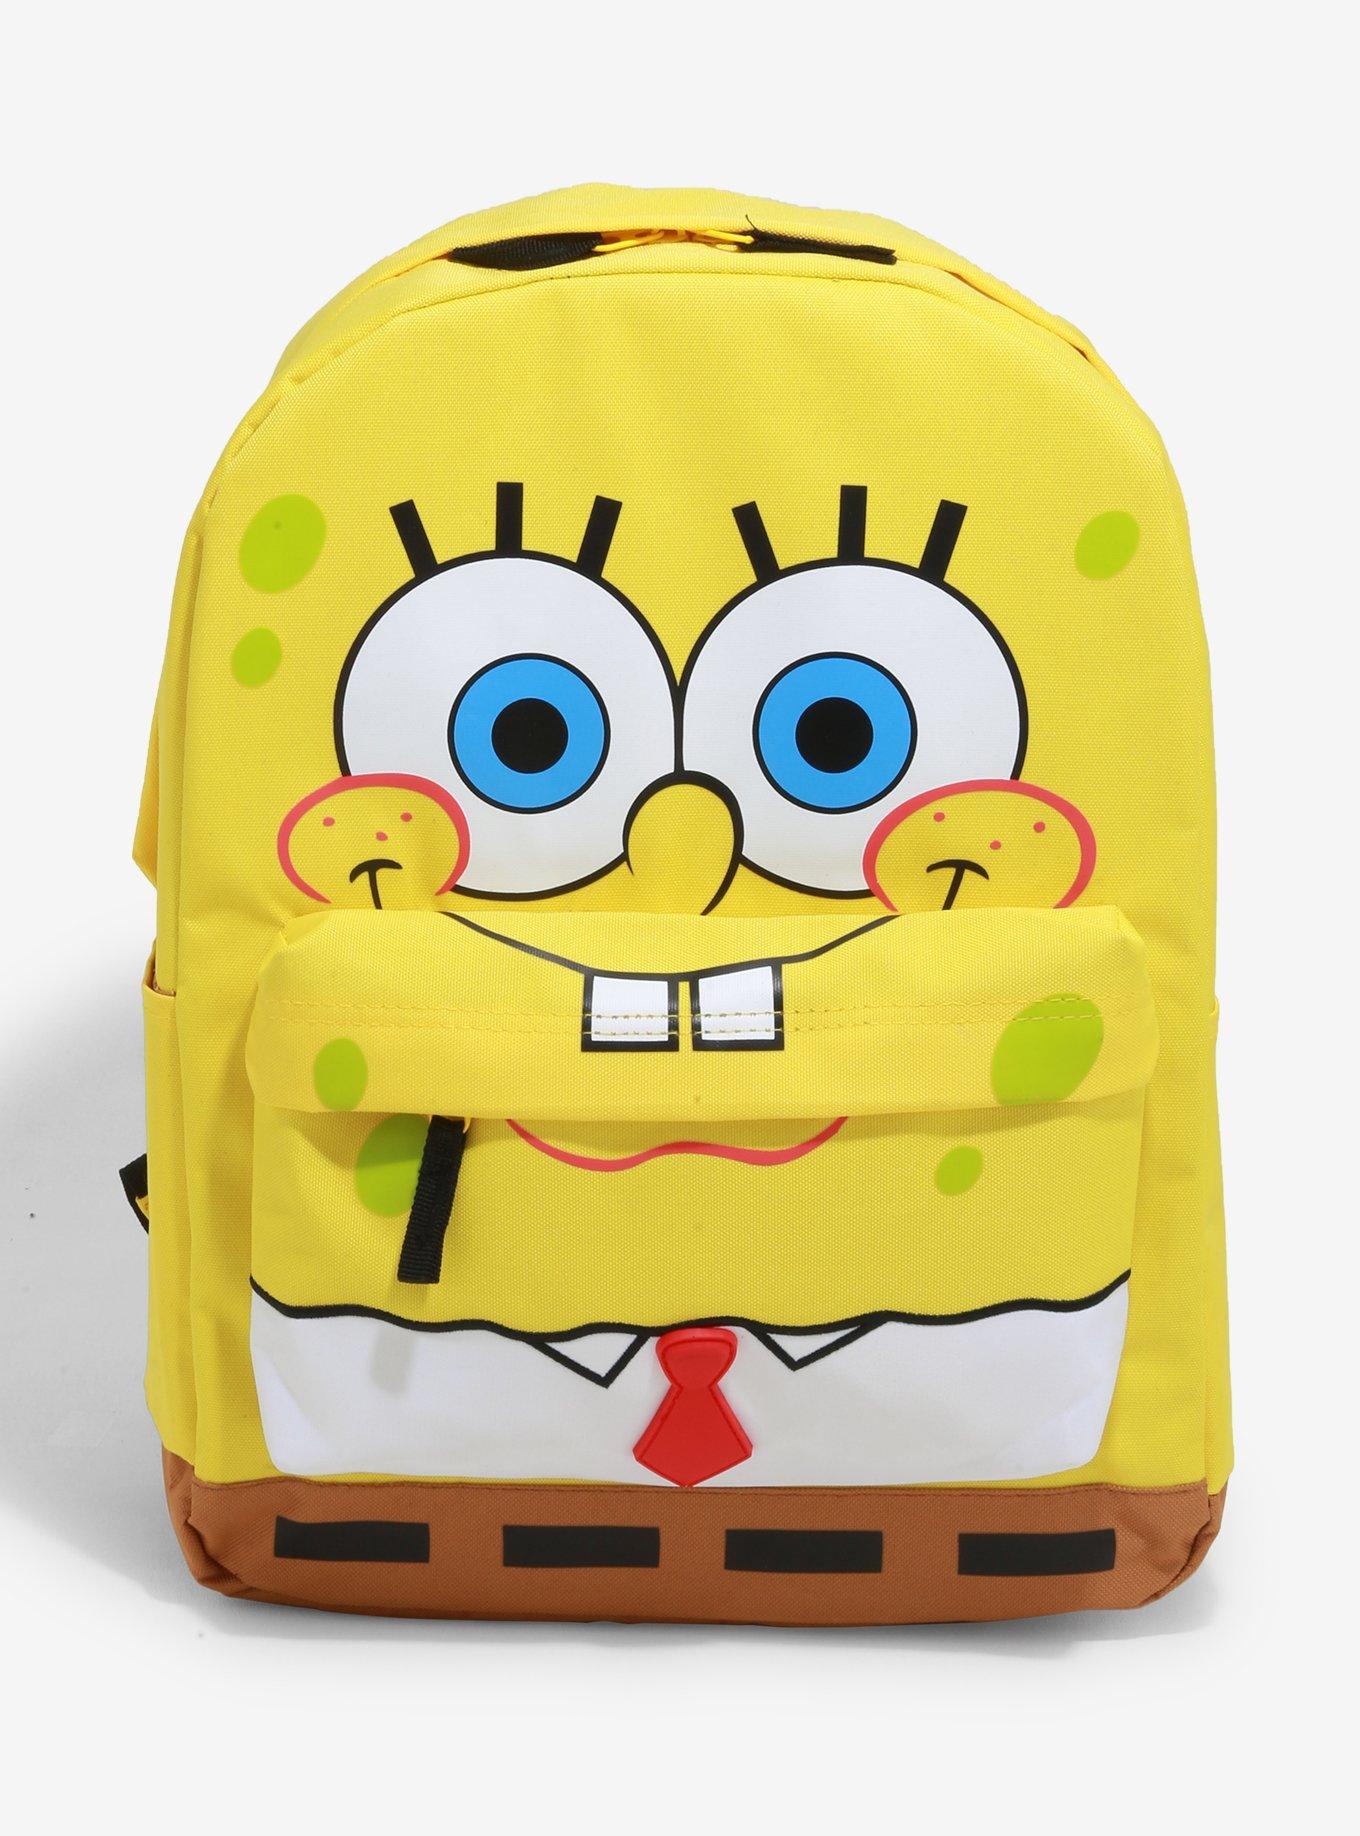 CONCEPT ONE SPONGEBOB CHECKERED BIG FACE BACKPACK SBMB0002-634 - The Home  Depot